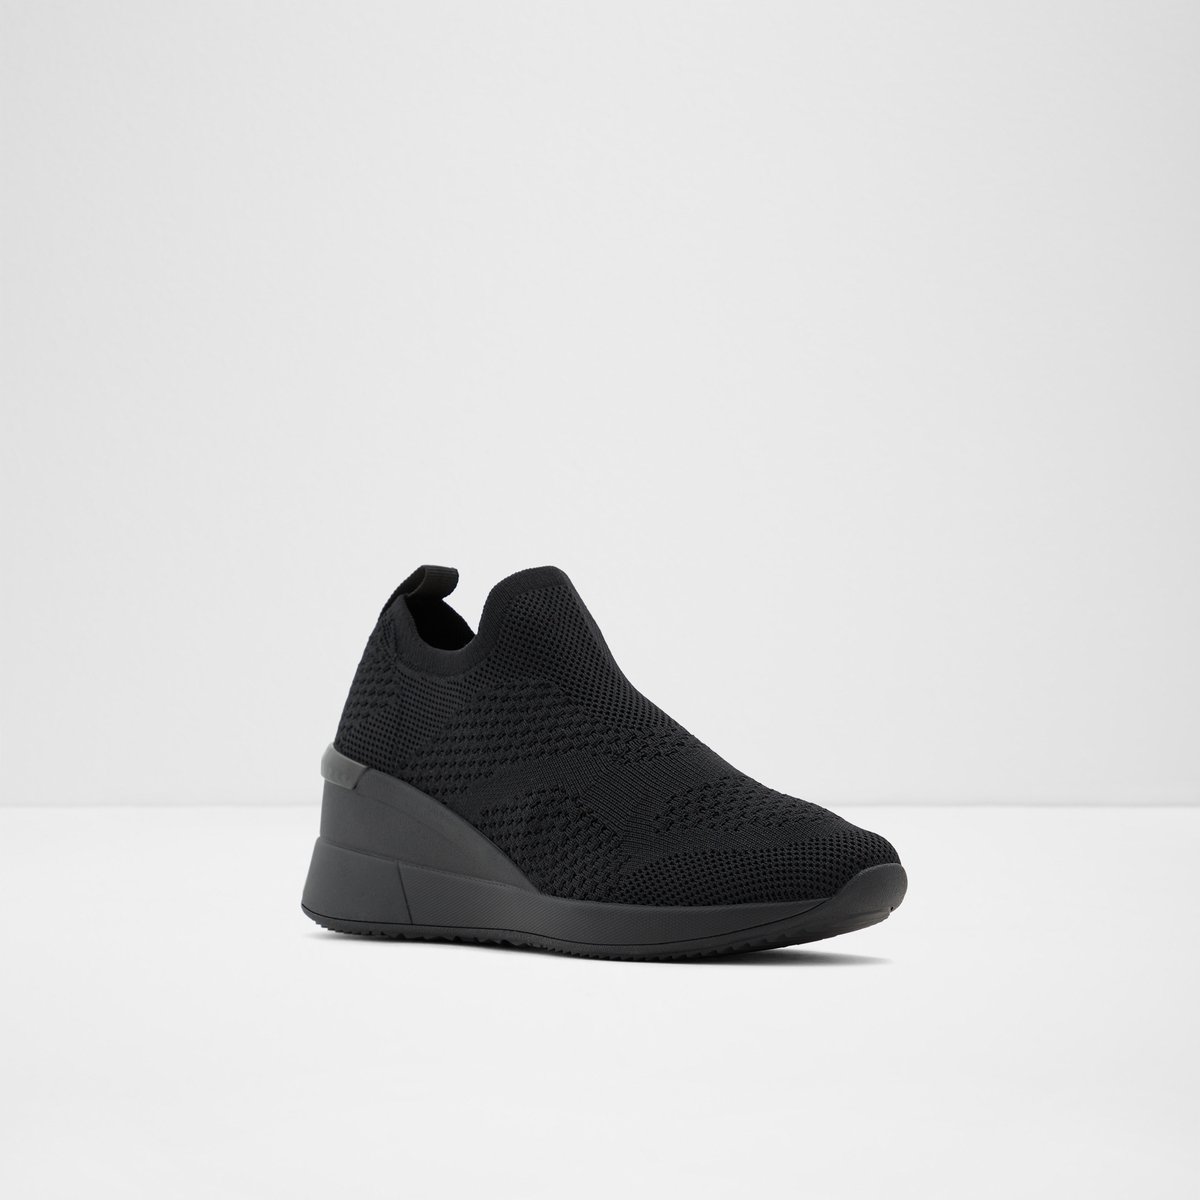 anden tusind Indica Revicta Black Women's Platform and wedge sneakers | ALDO US